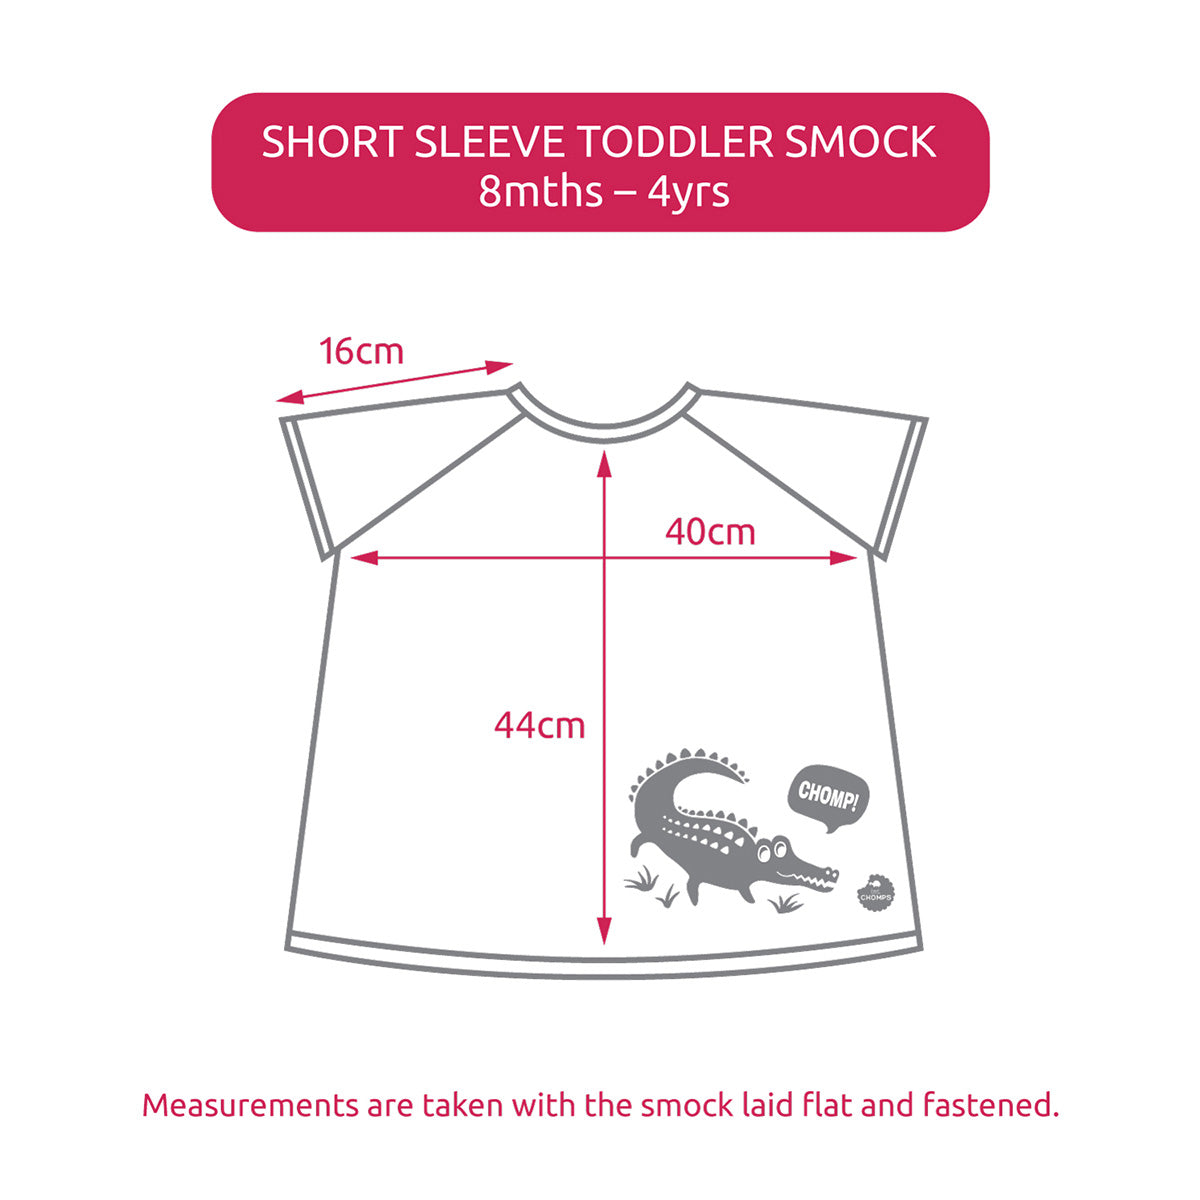 Little Chomps Short Sleeve Messy Mealtime (Toddler) Smock Bib: 8mths to 4yrs